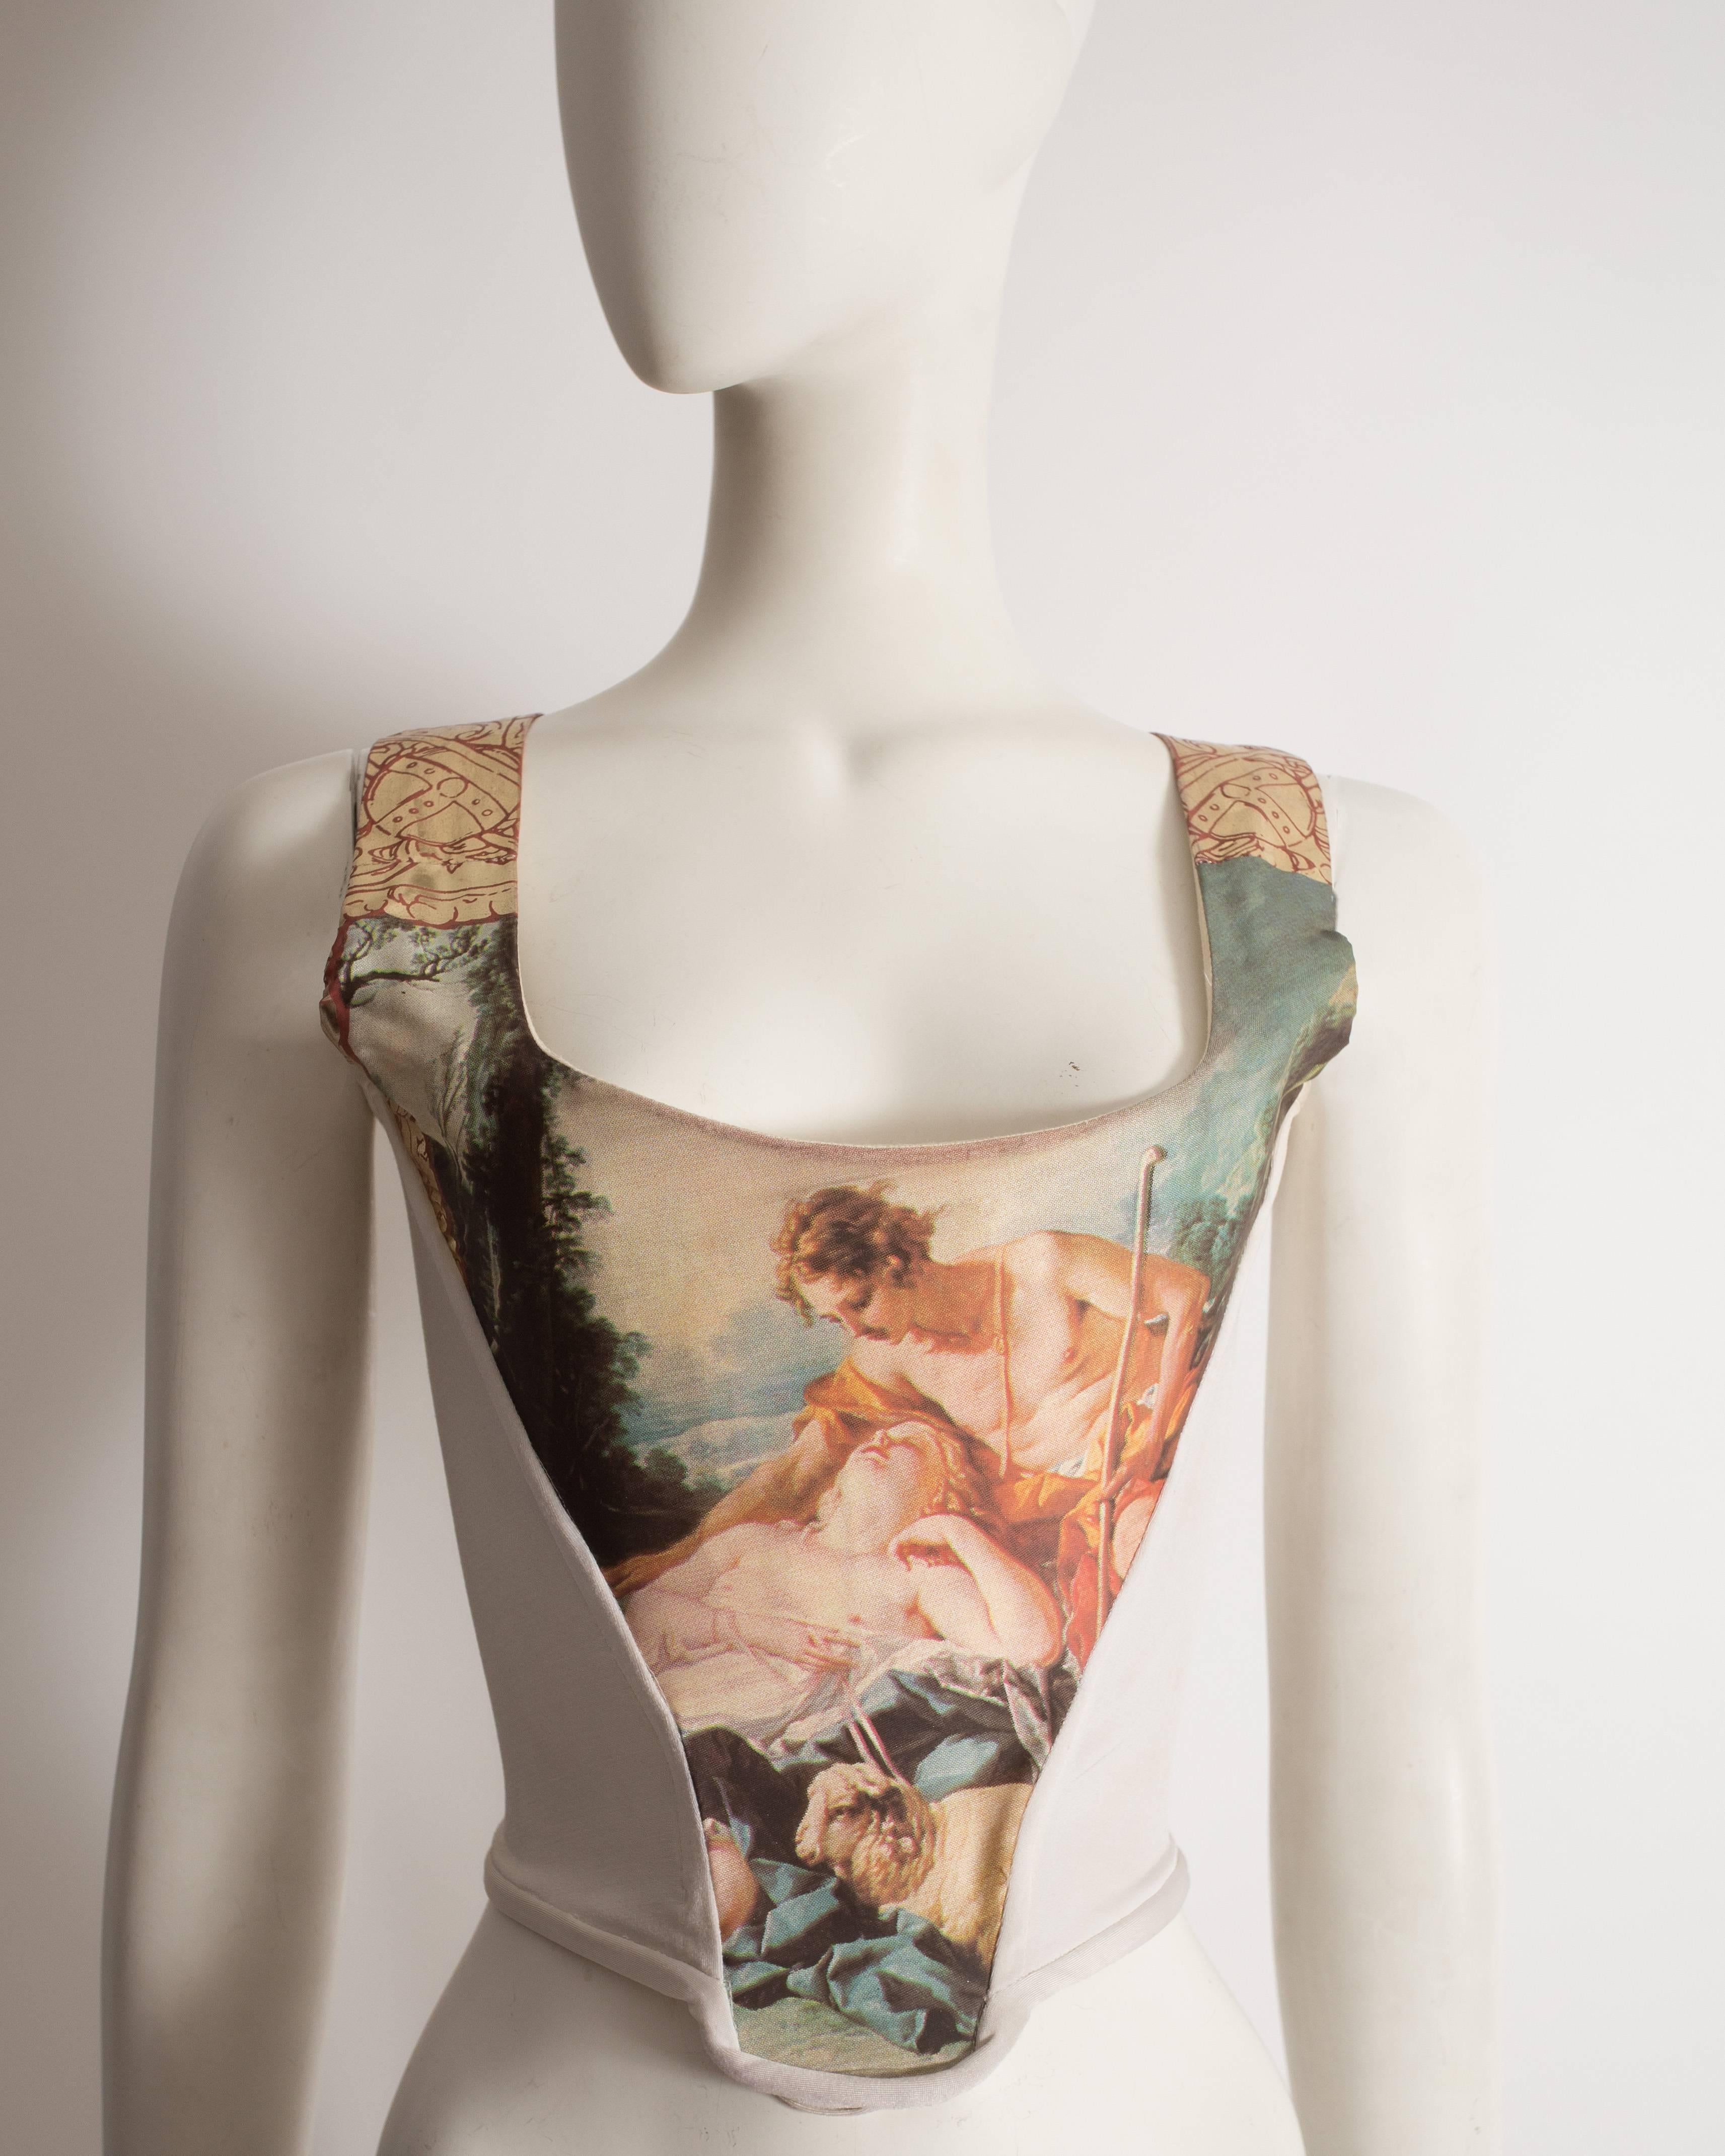 Rare and iconic Vivienne Westwood corset from the 'Portrait Collection' autumn-winter 1990. Features the François Boucher oil painting 'Daphnis and Chloe' c. 1743.